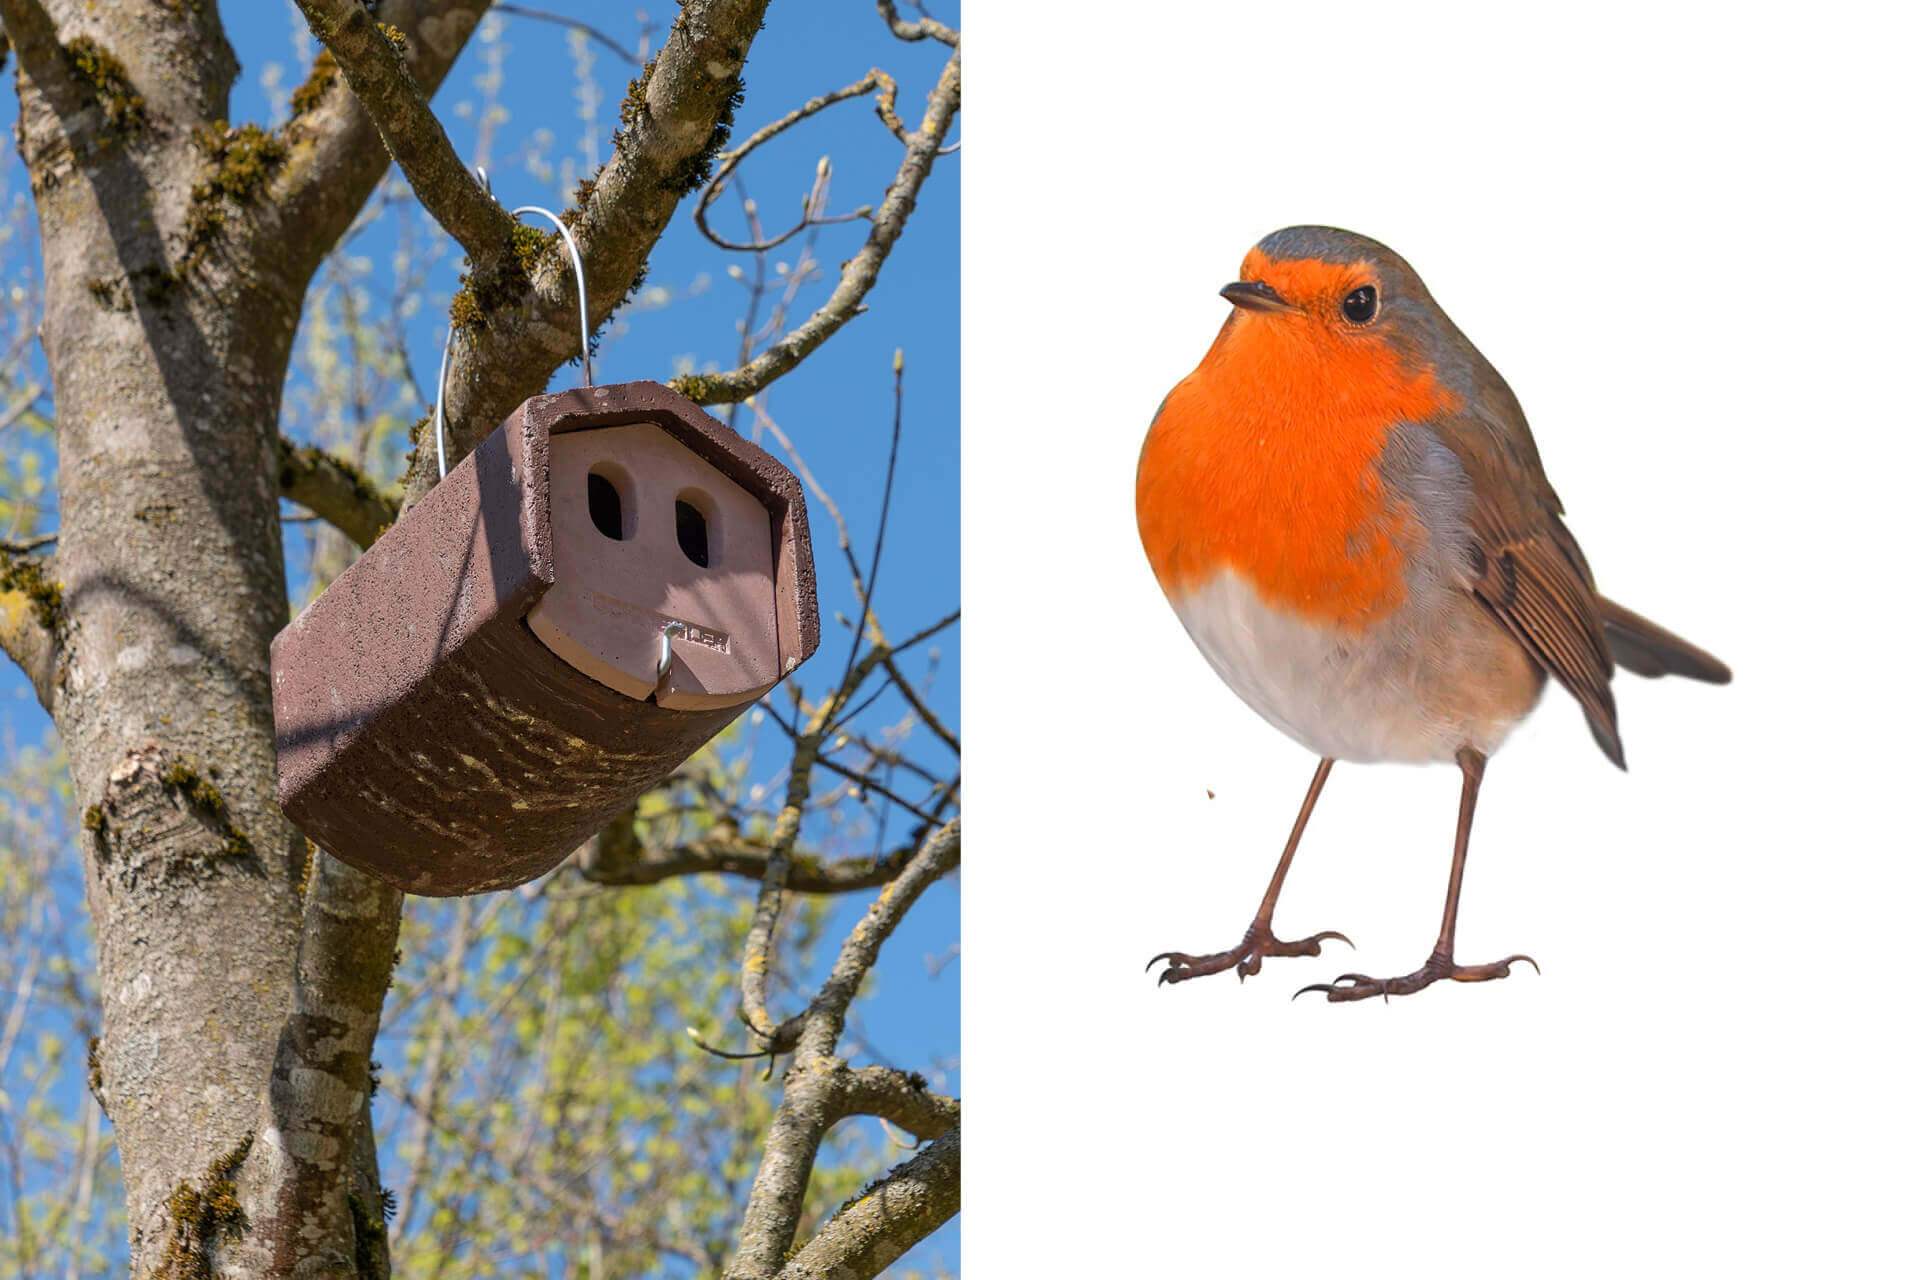 European robins enjoy cavities like these for nesting. The two holes allow more sunlight to enter the cave—which makes the nest inside a little brighter and warmer for their offspring.